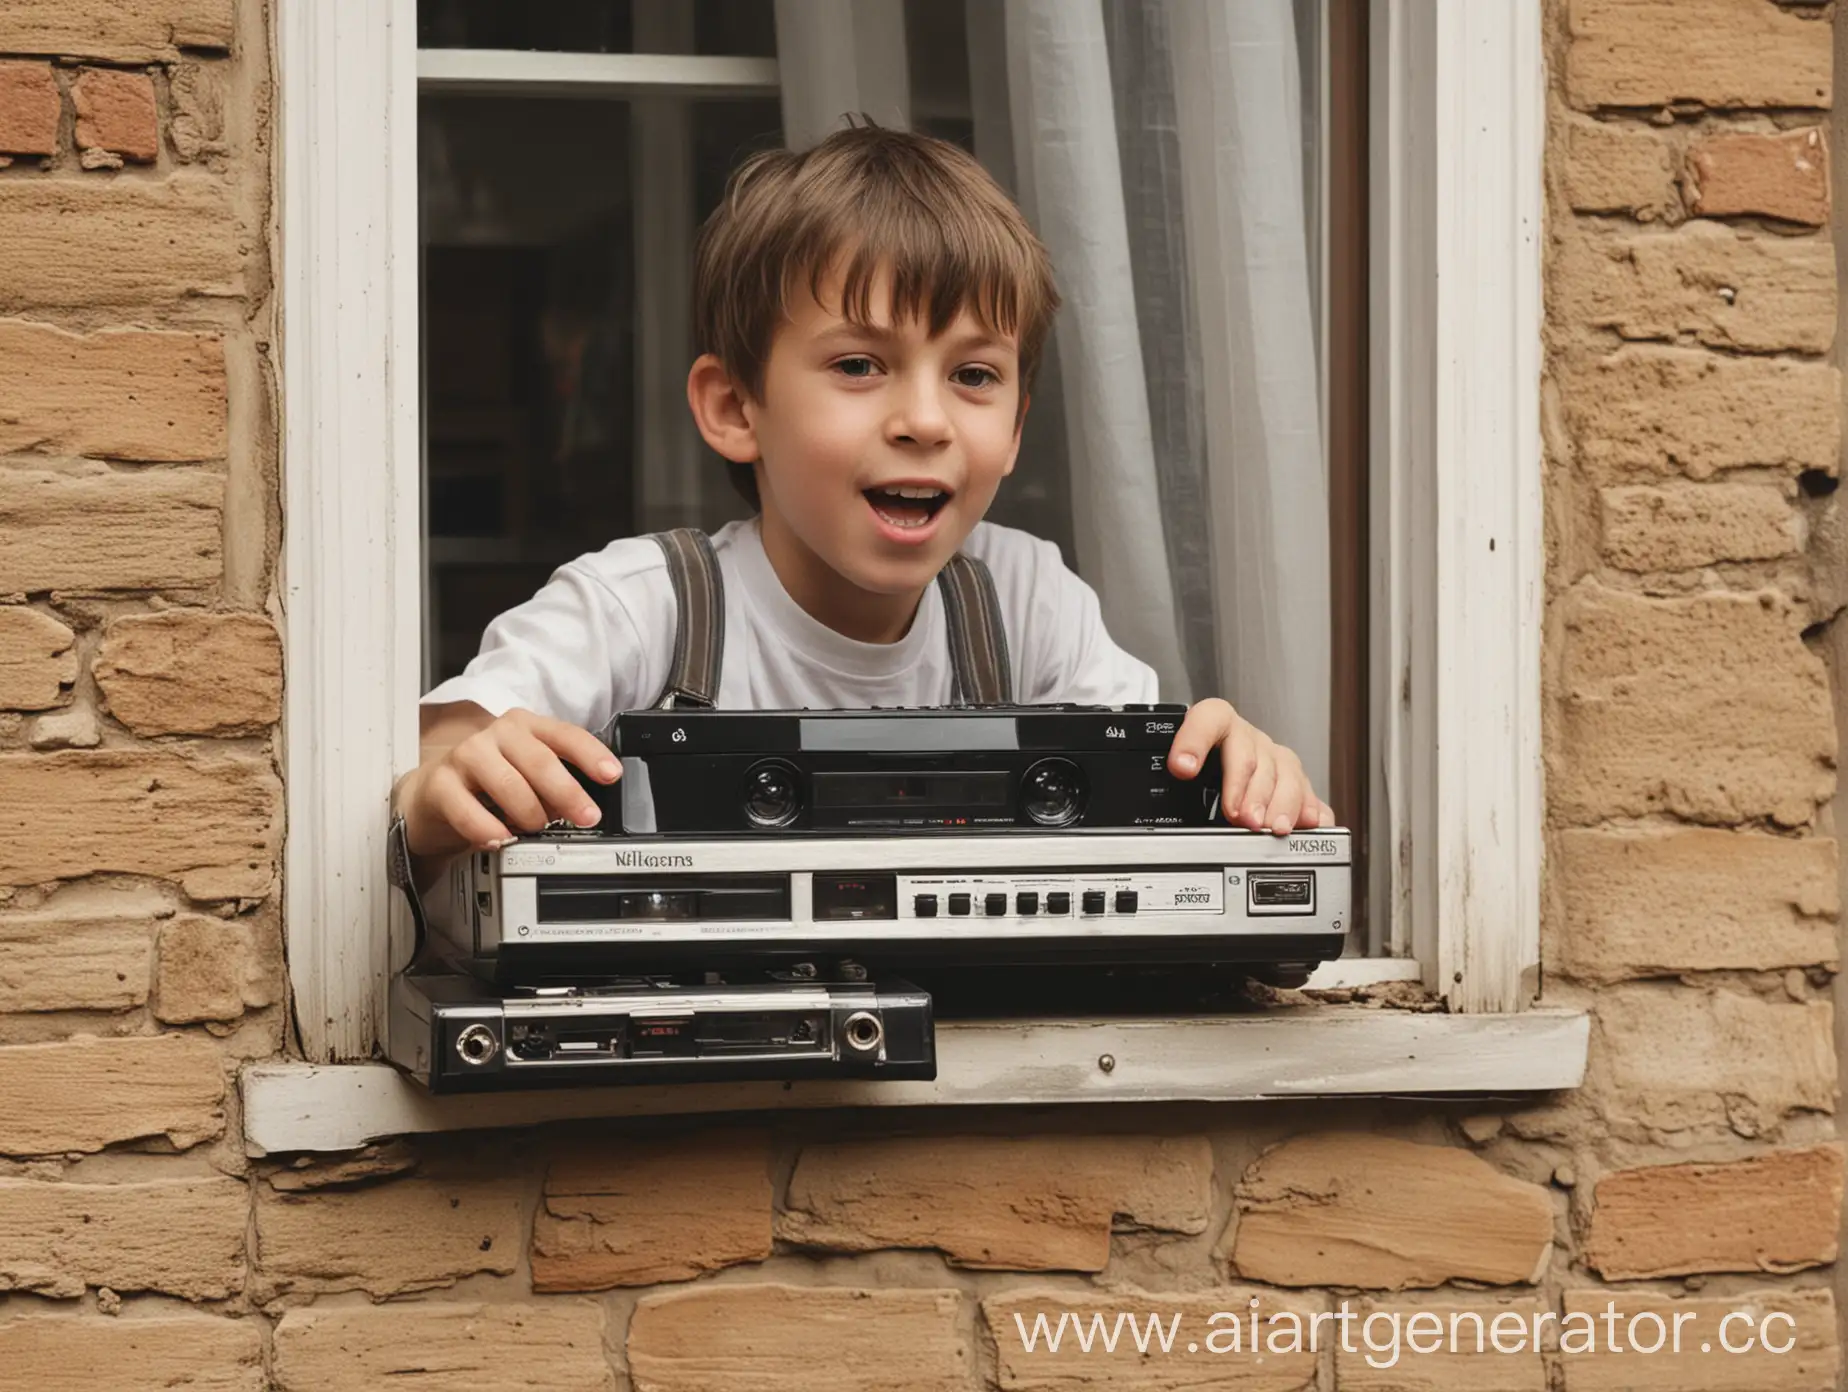 Young-DJ-Enjoys-Village-Street-View-from-Window-with-DualCassette-Recorder